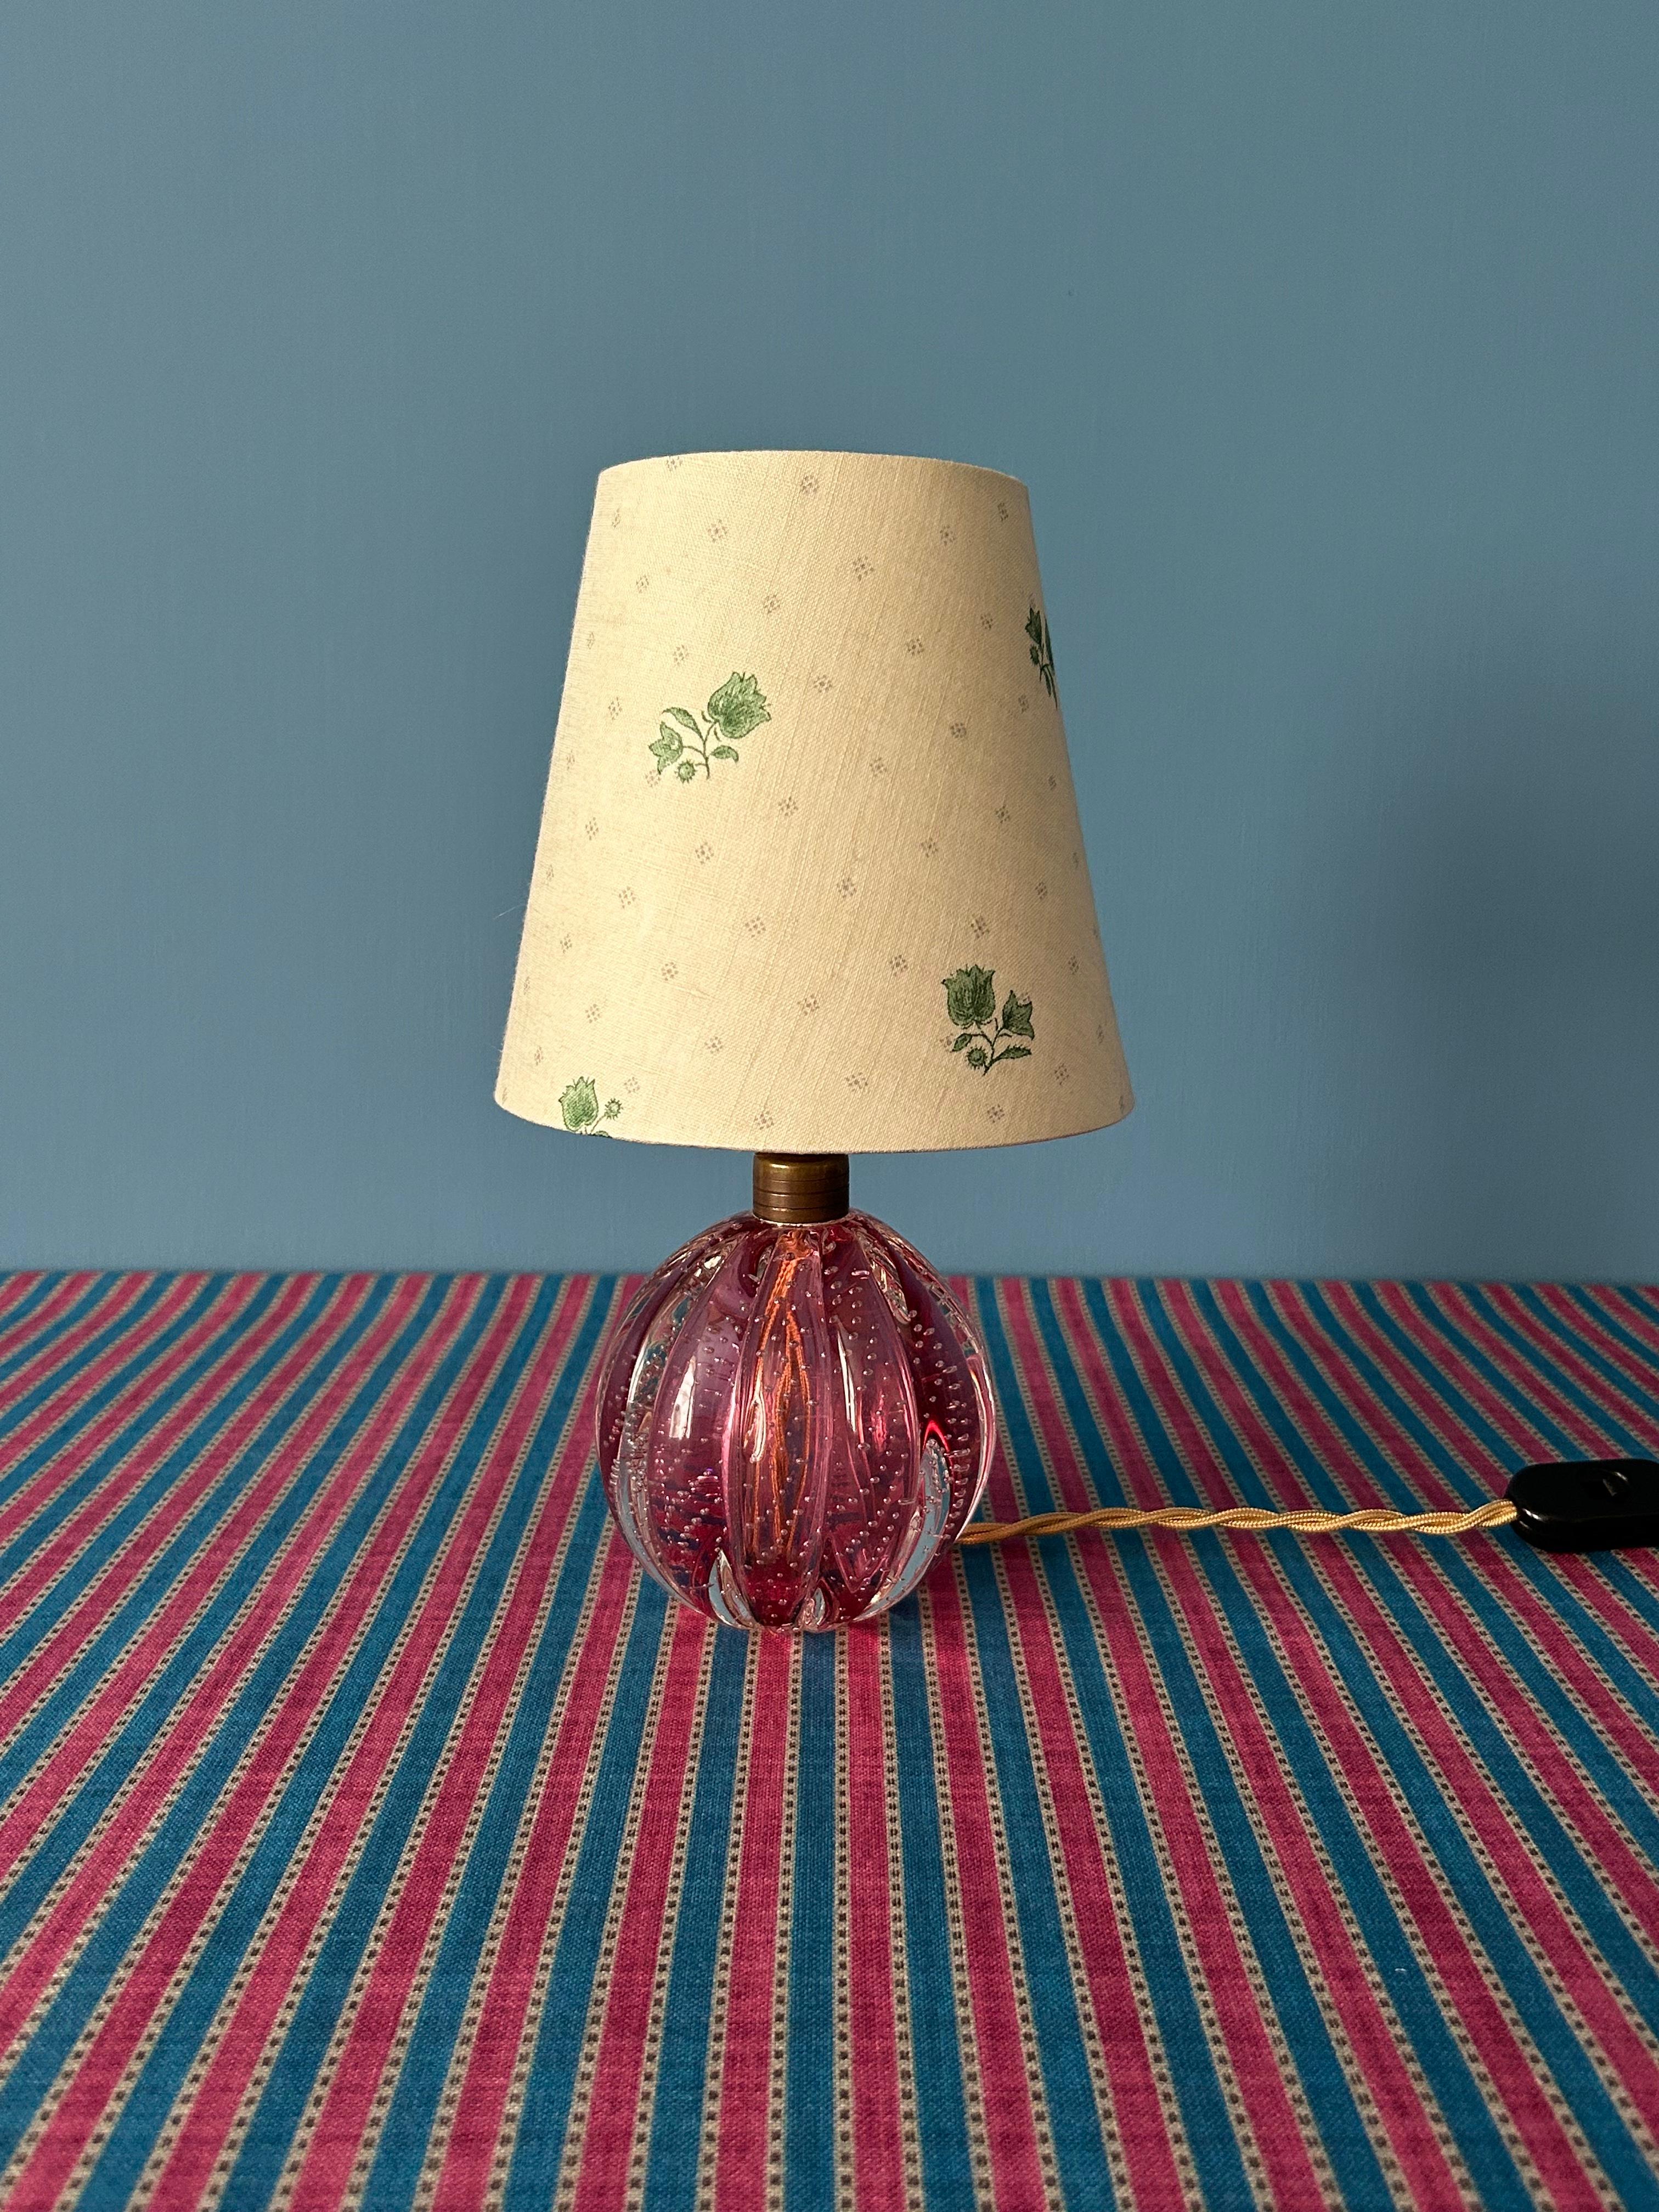 Italian Vintage Pink Murano Table Lamp with Customized Green Floral Shade, Italy, 1950s For Sale